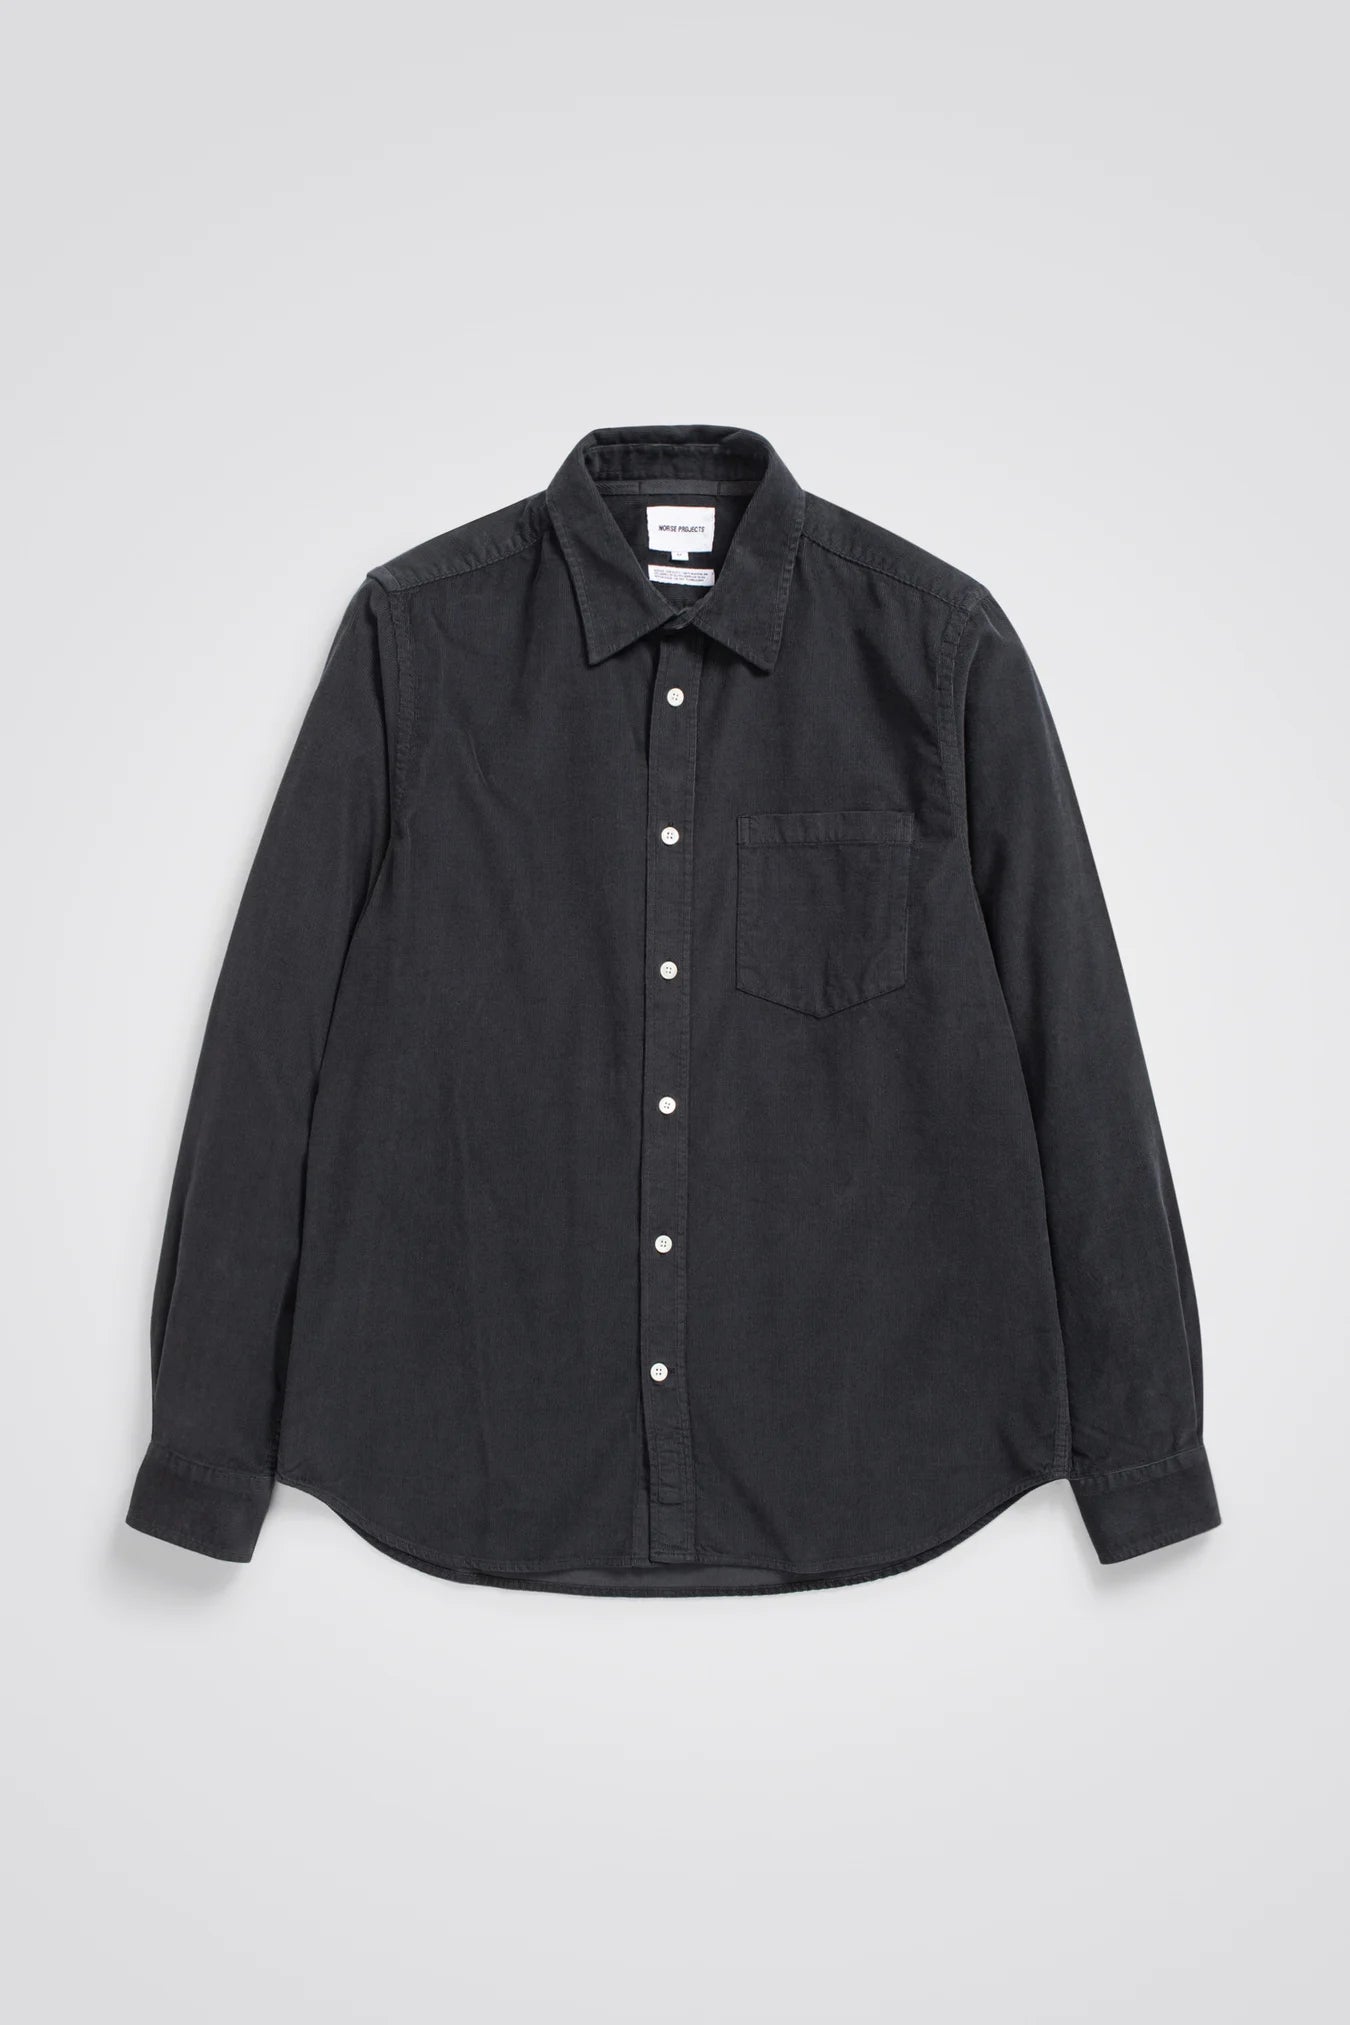 Norse Osvald Micro Cord Shirt Pewter - KYOTO - Norse Projects